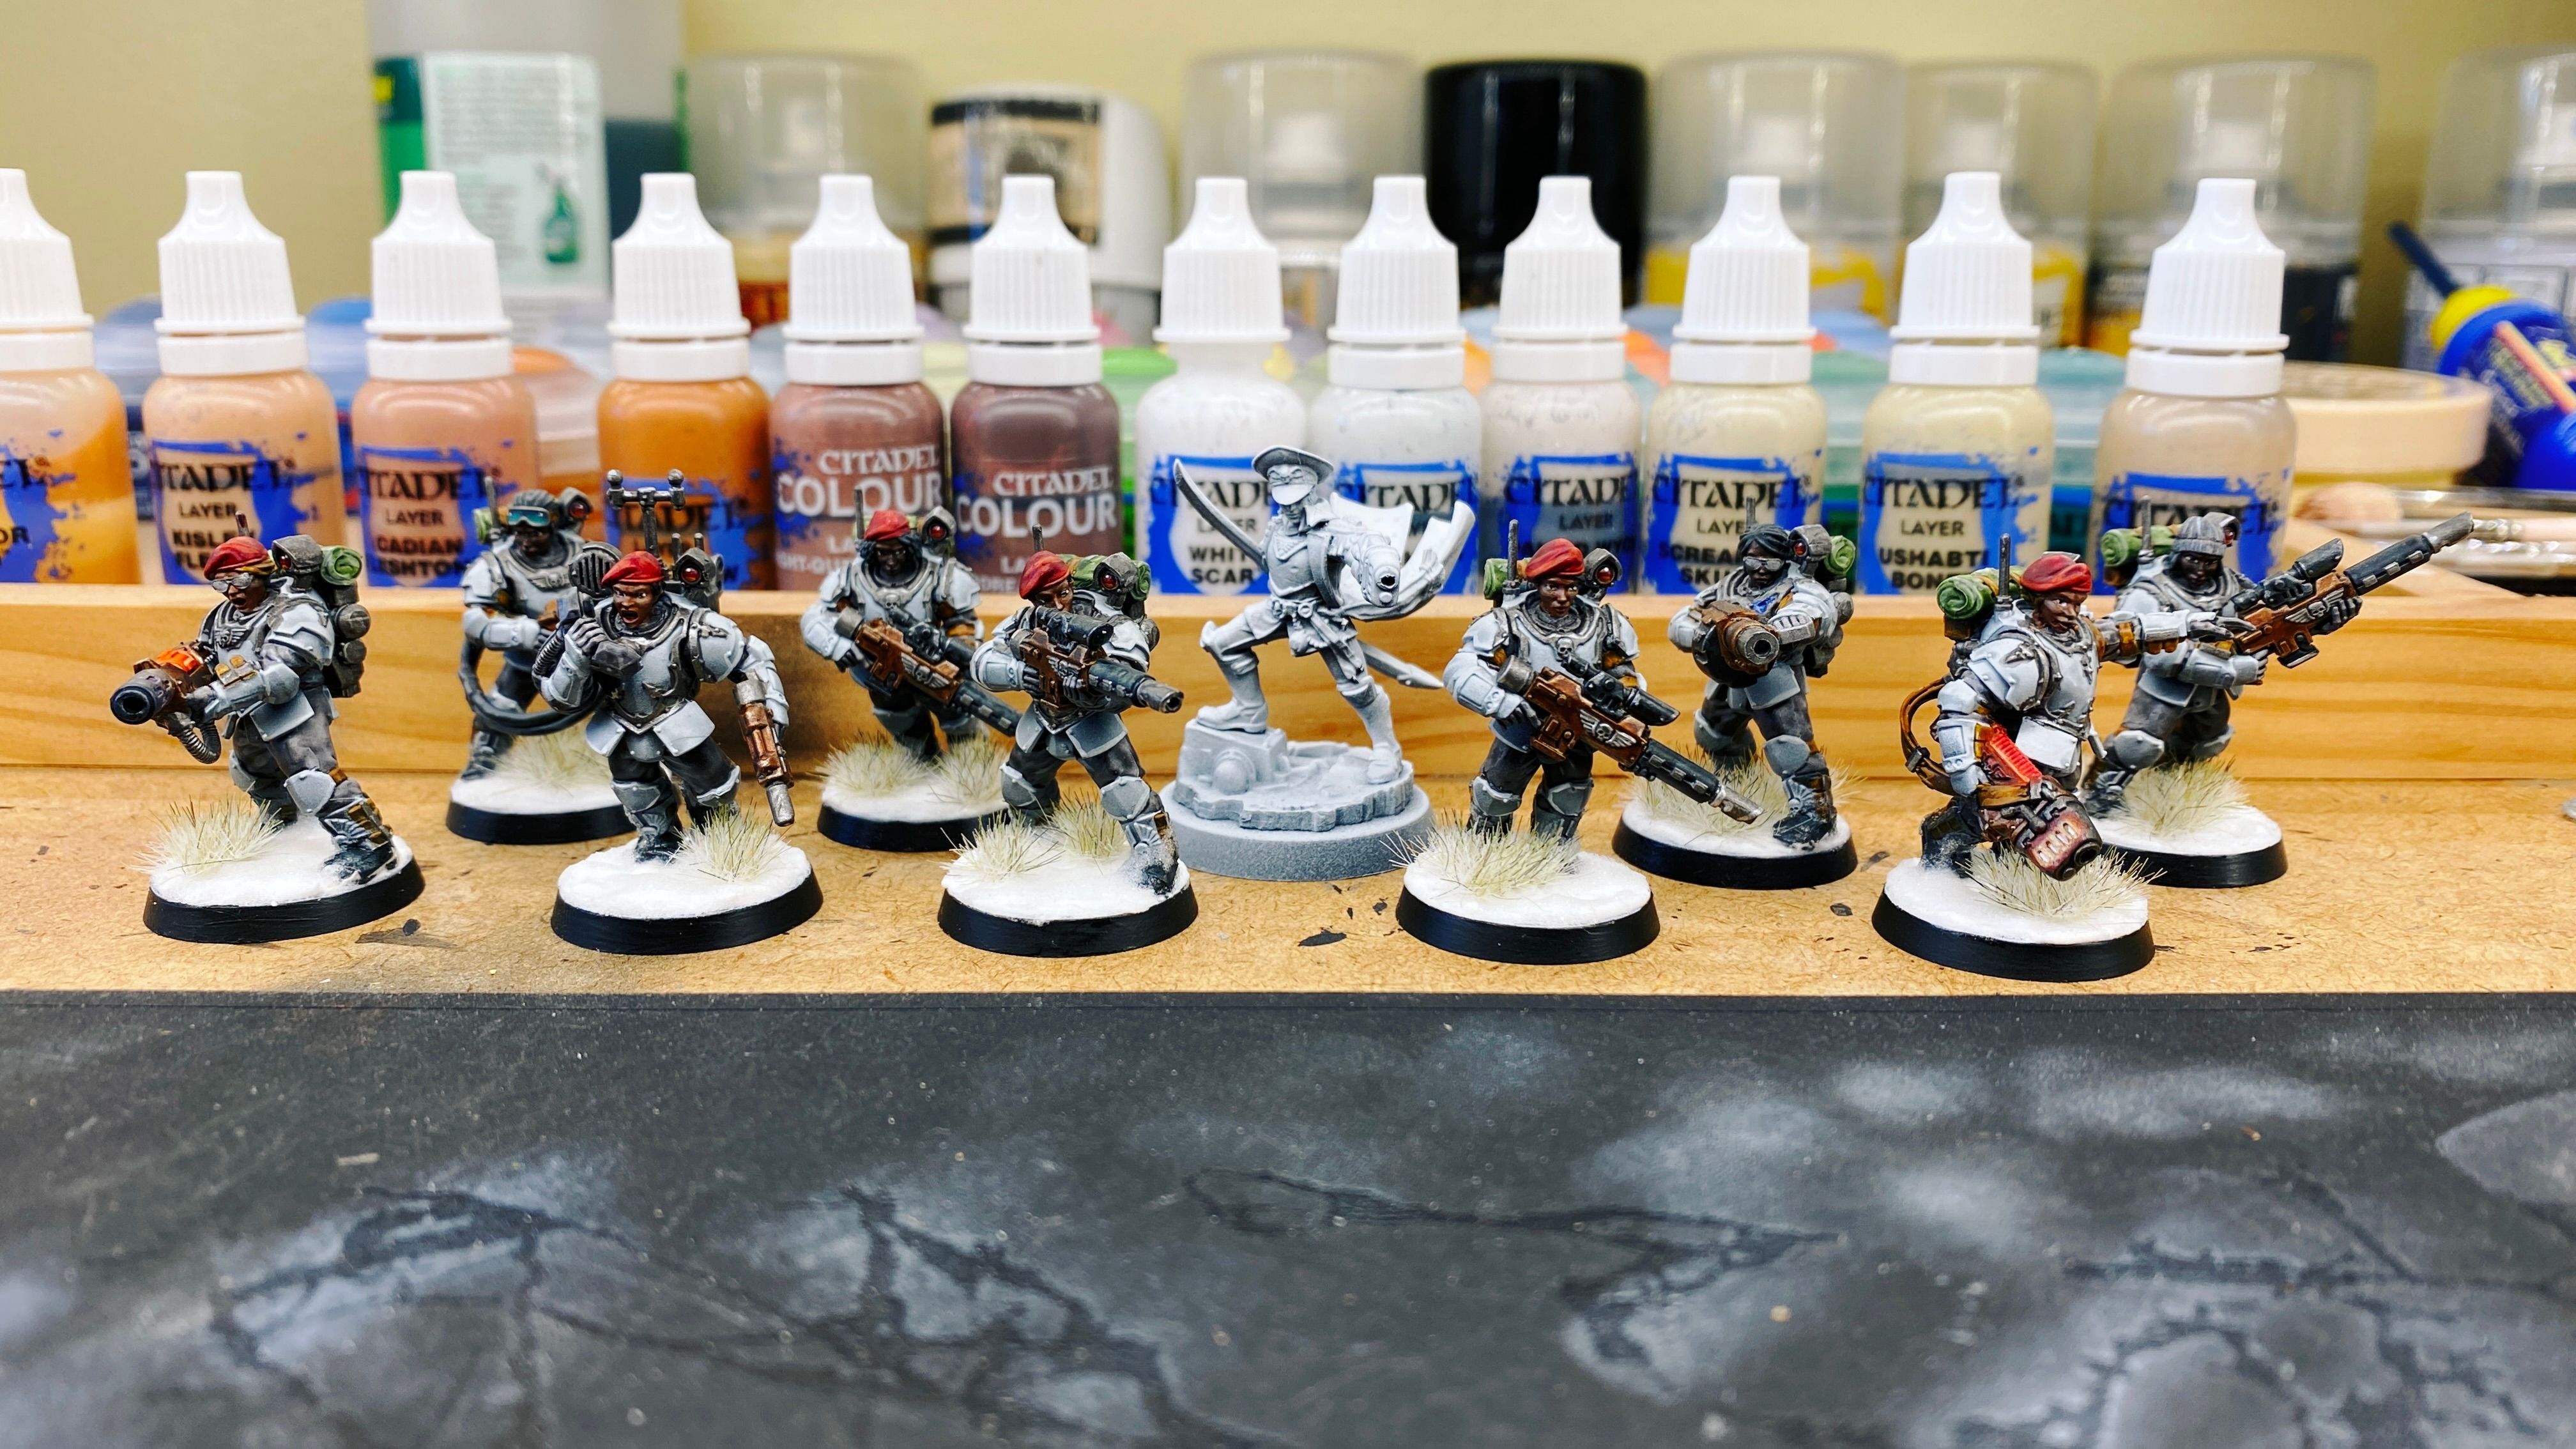 A photo of nine Warhammer 40,000 miniatures, they're fully-painted heavily armoured women troopers in very pale blue/grey armour wielding various guns. The four at the back have black skin and the new five have brown skin. Their bases are painted up to look like they're standing on snow, and there's wintery grass tufts on the bases too.

The unpainted leader in the middle is standing with one leg up on a piece of machinery, with her cloak billowing out behind her and pointing a plasma pistol in an imposing fashion.